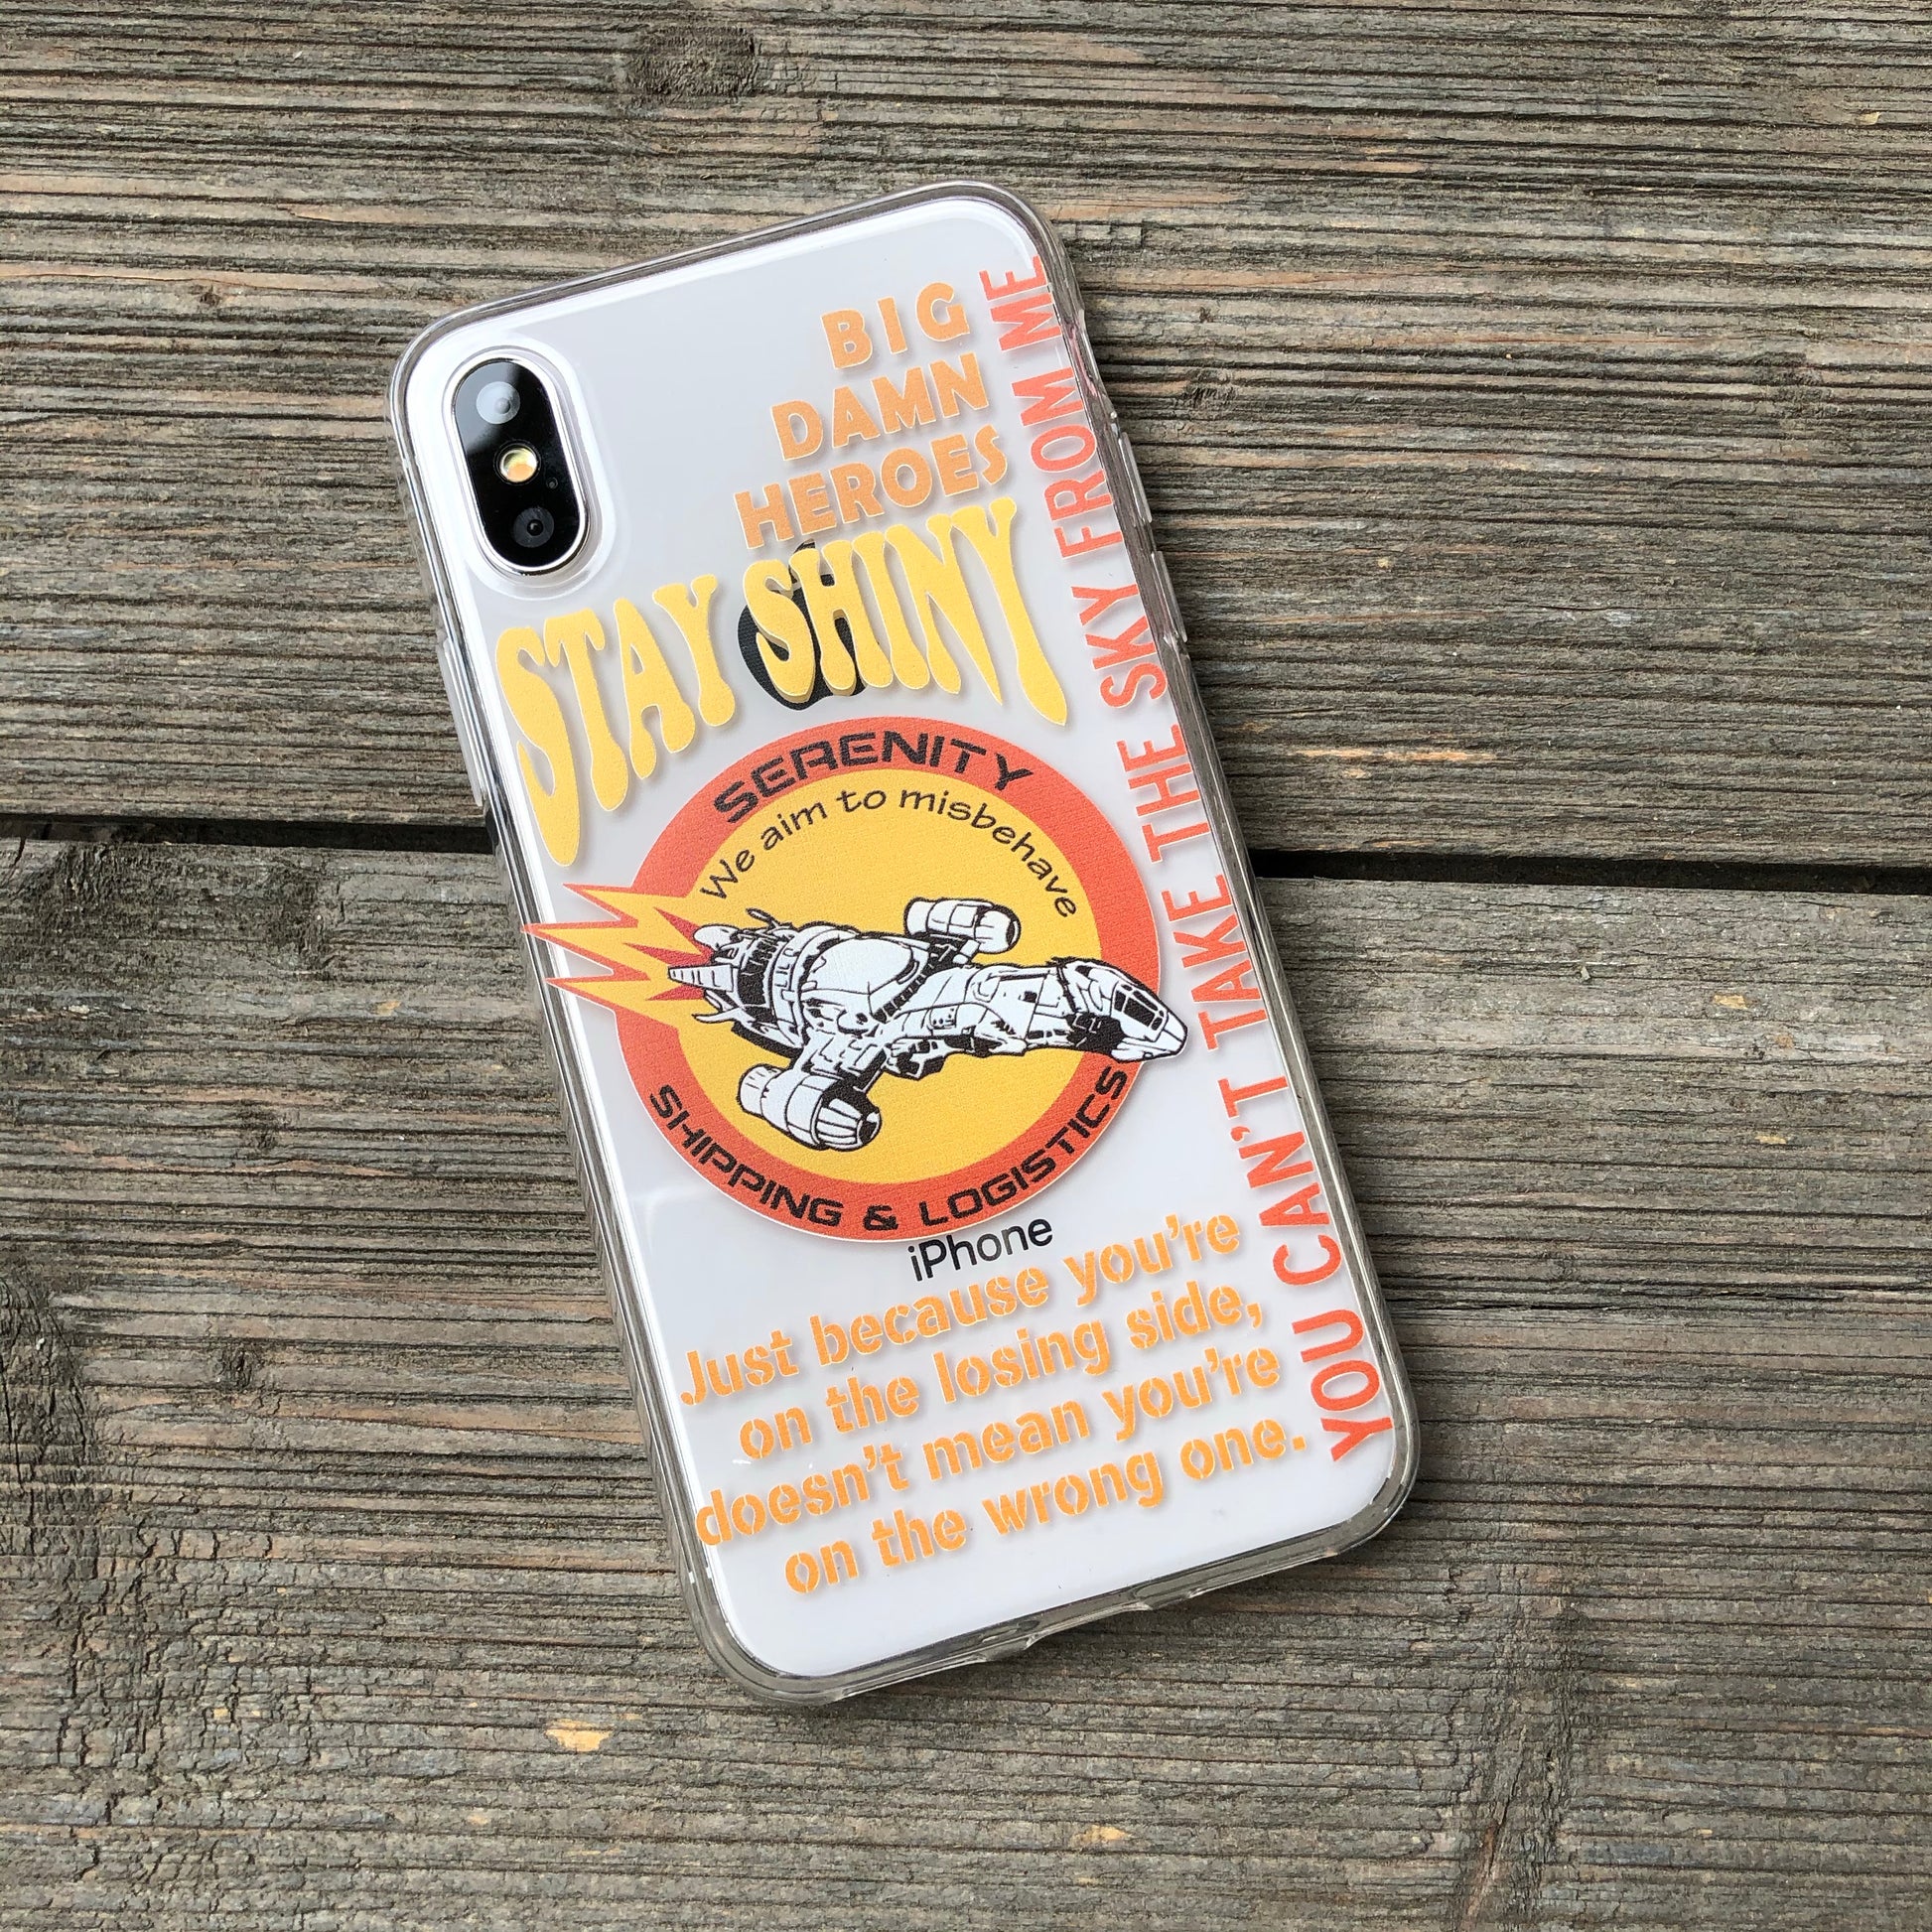 serenity firefly space ship phone case